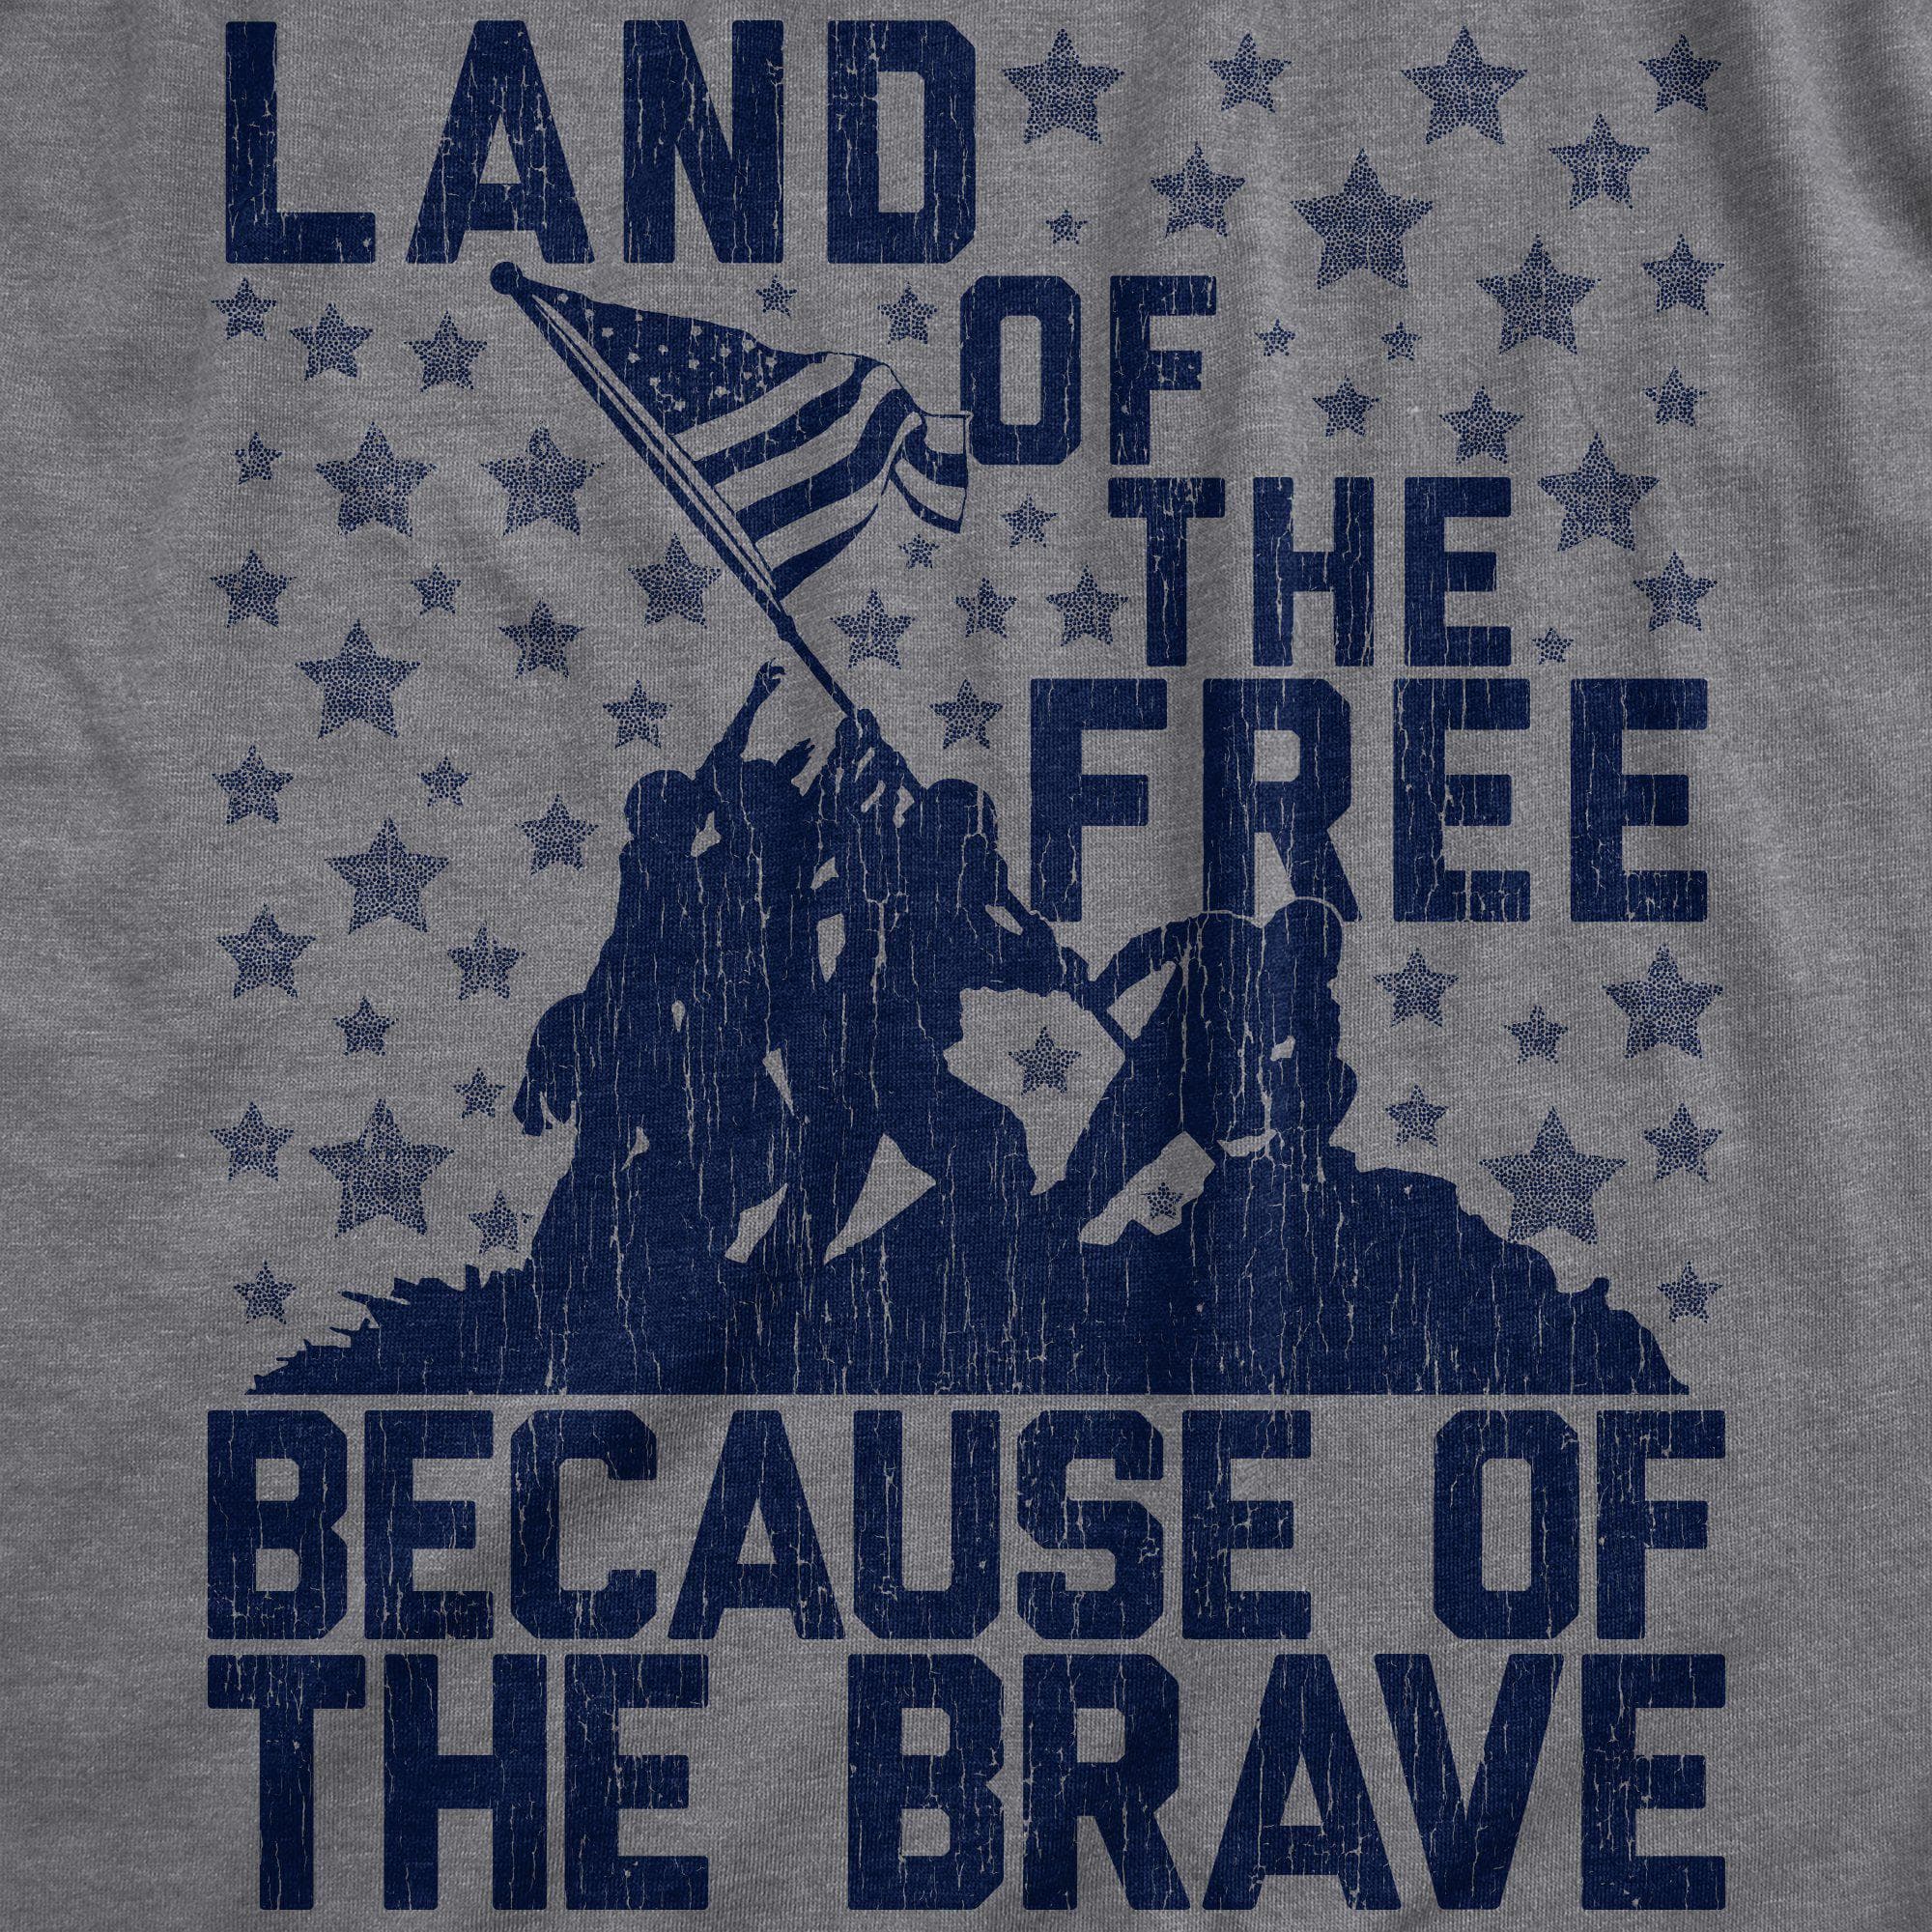 Land Of The Free Because Of The Brave Men's Tshirt - Crazy Dog T-Shirts